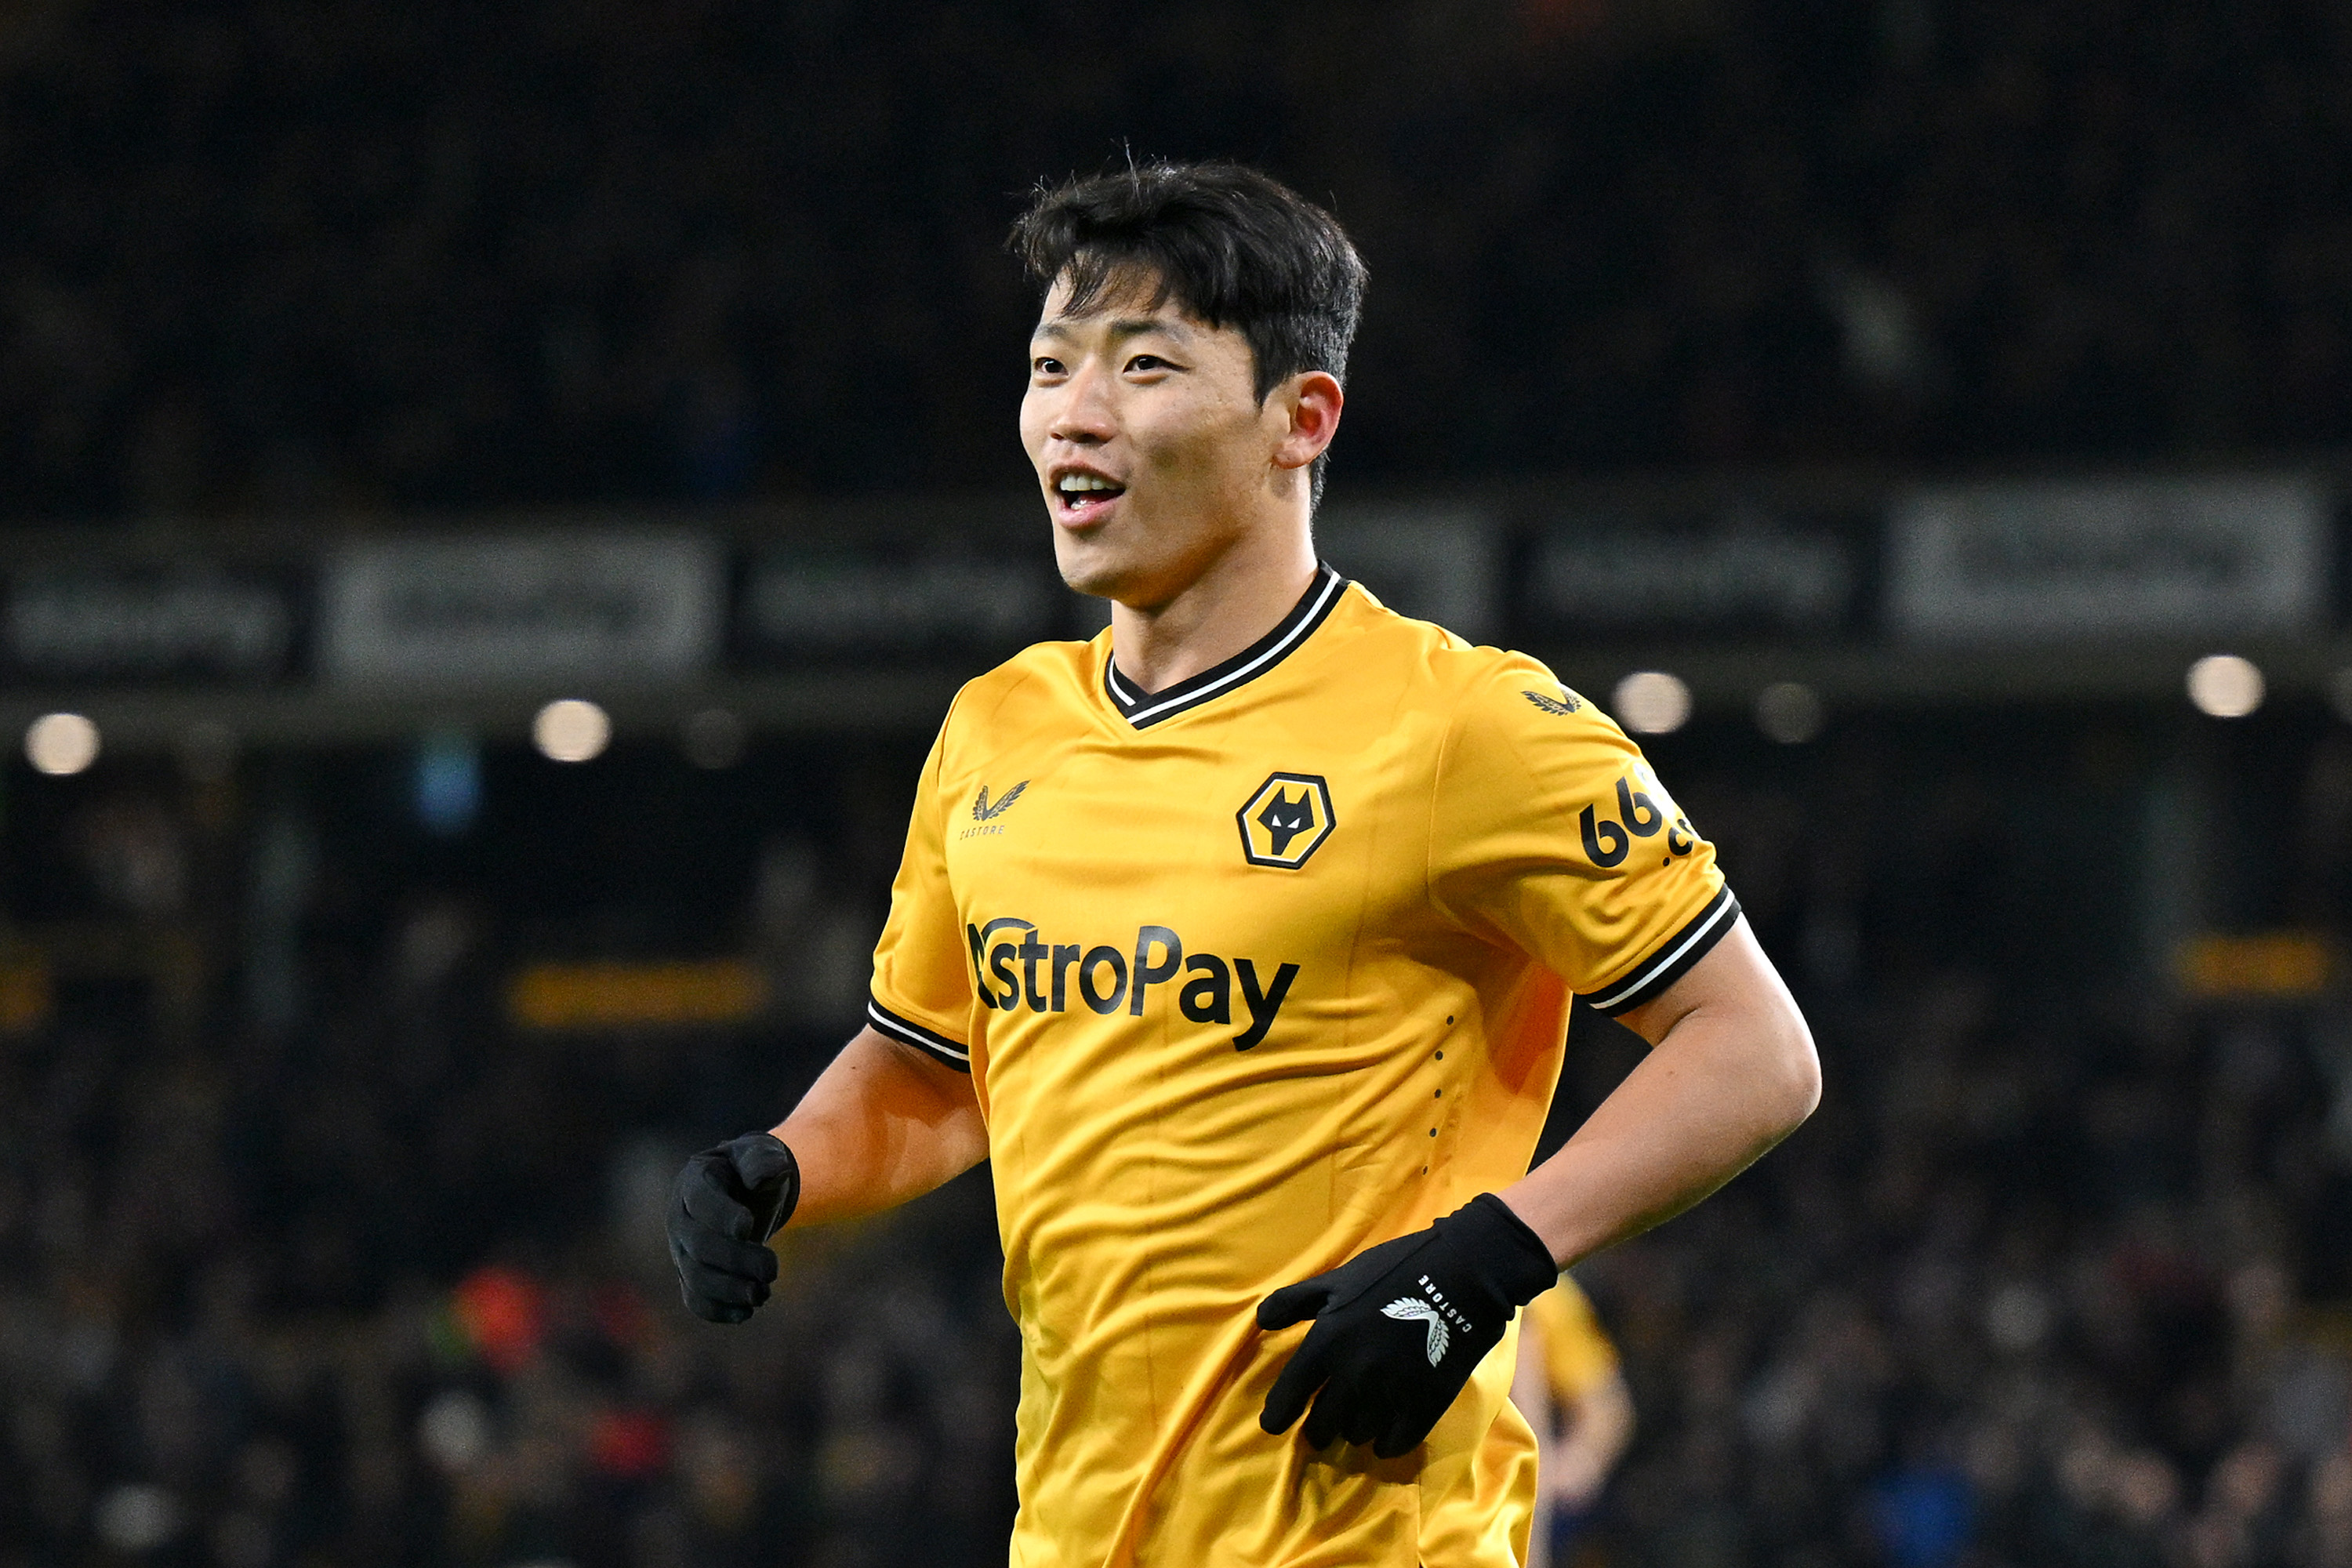 Hwang has been in superb form this season